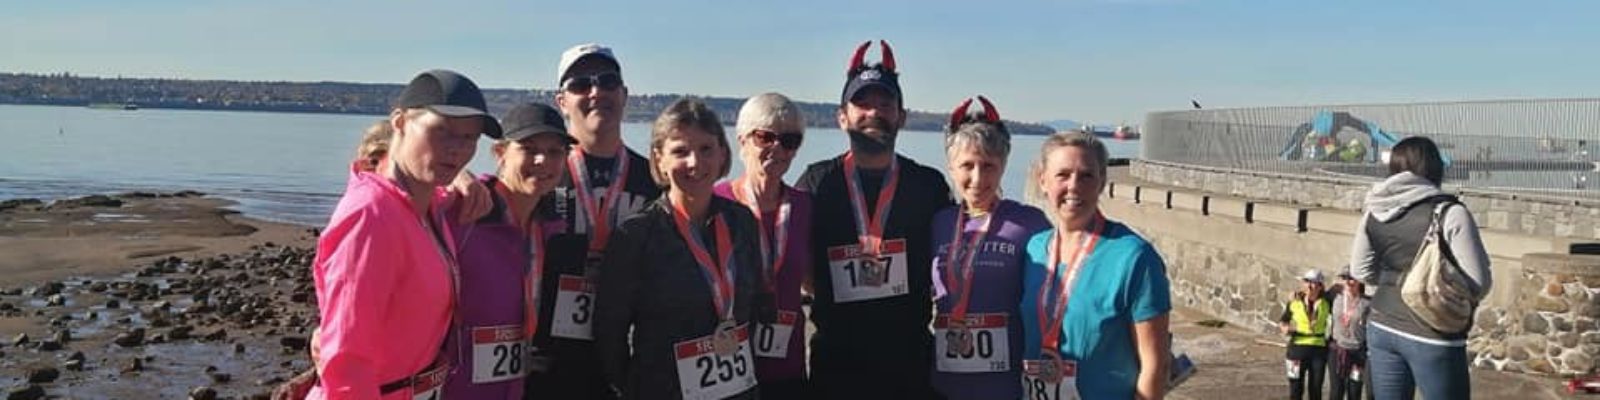 PaceSetter Run Club at the James Cunningham Seawall Race 2019